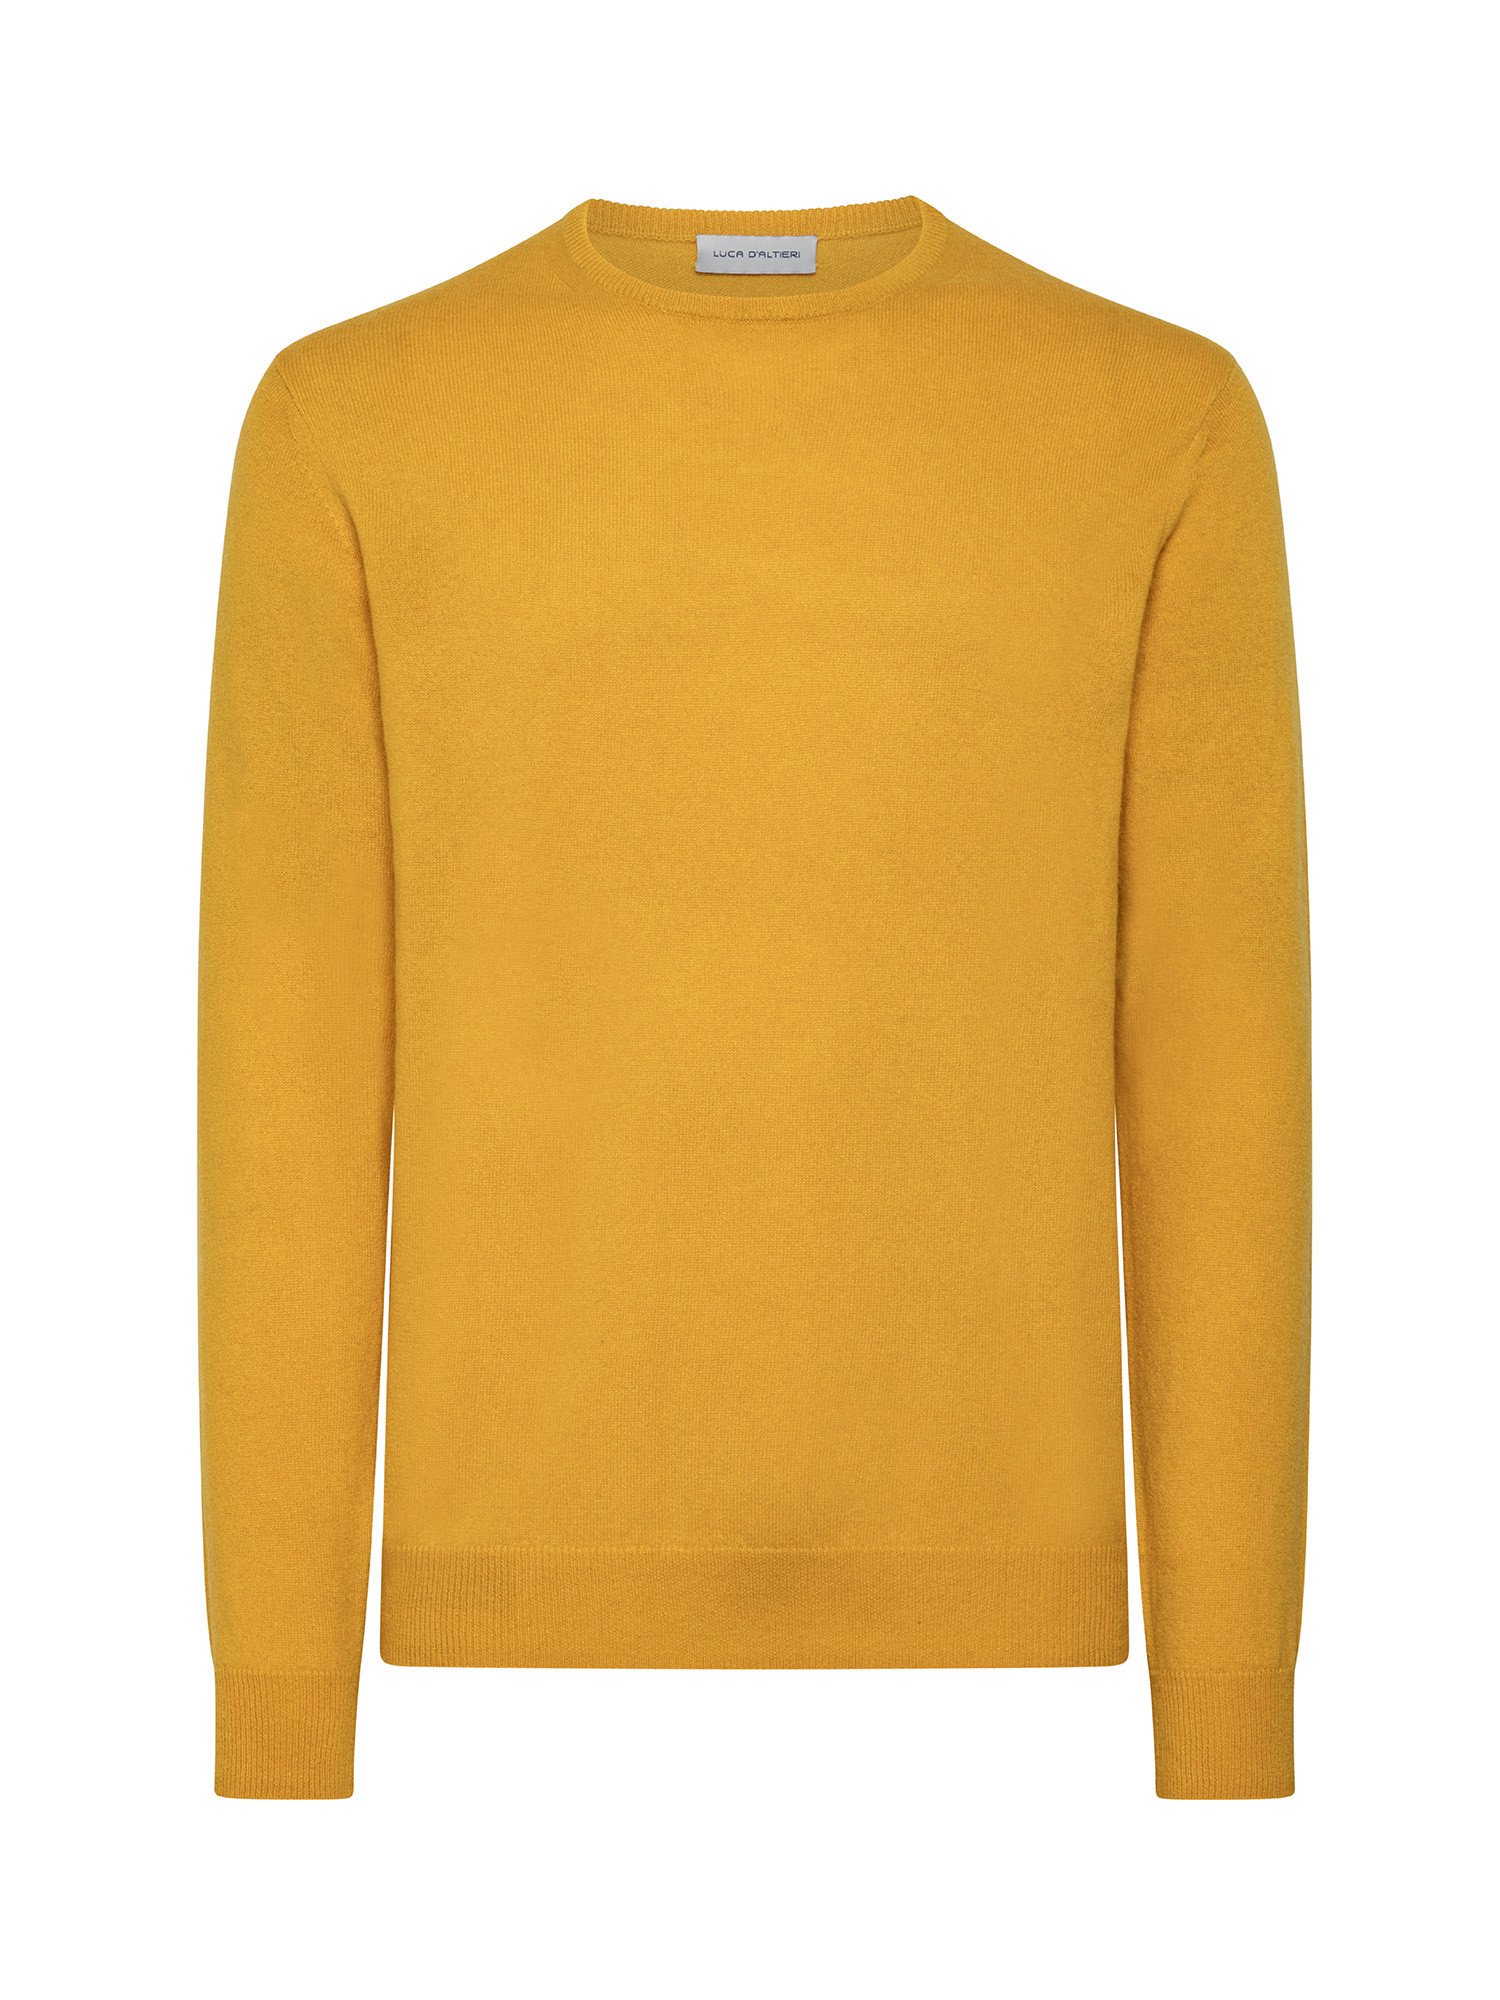 Pullover girocollo in puro cashmere, Giallo, large image number 0